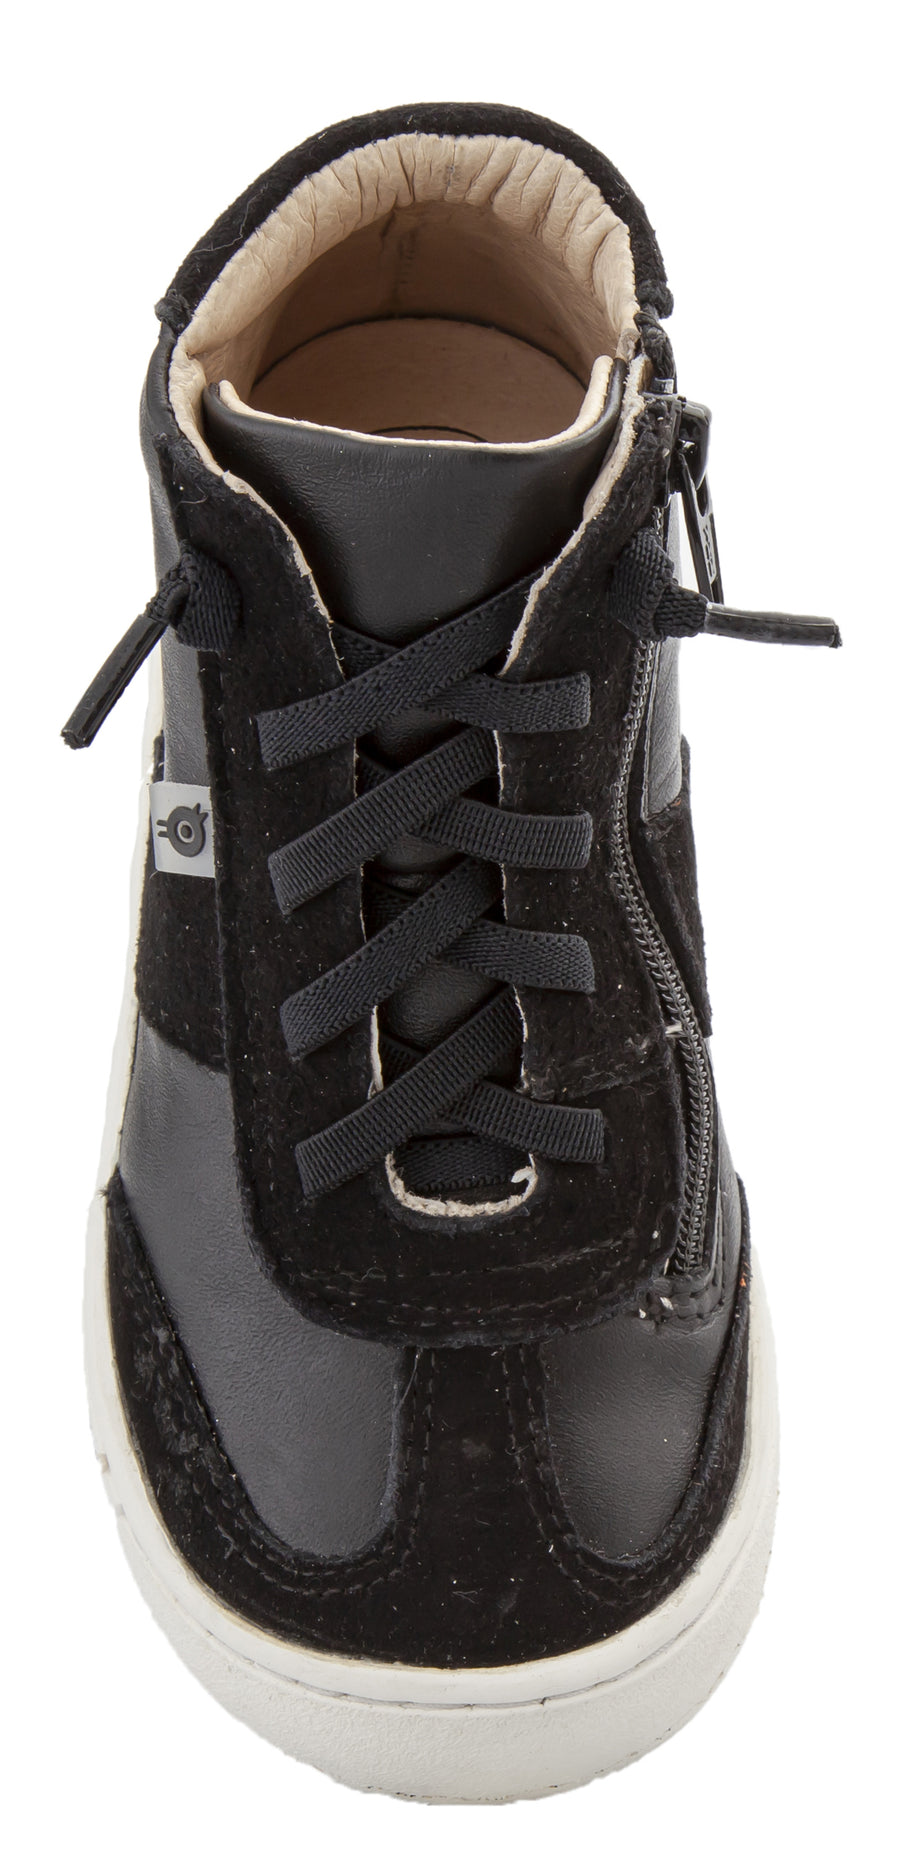 Old Soles Girl's & Boy's 9001 Travel High Top Leather Sneakers - Black/Black Suede